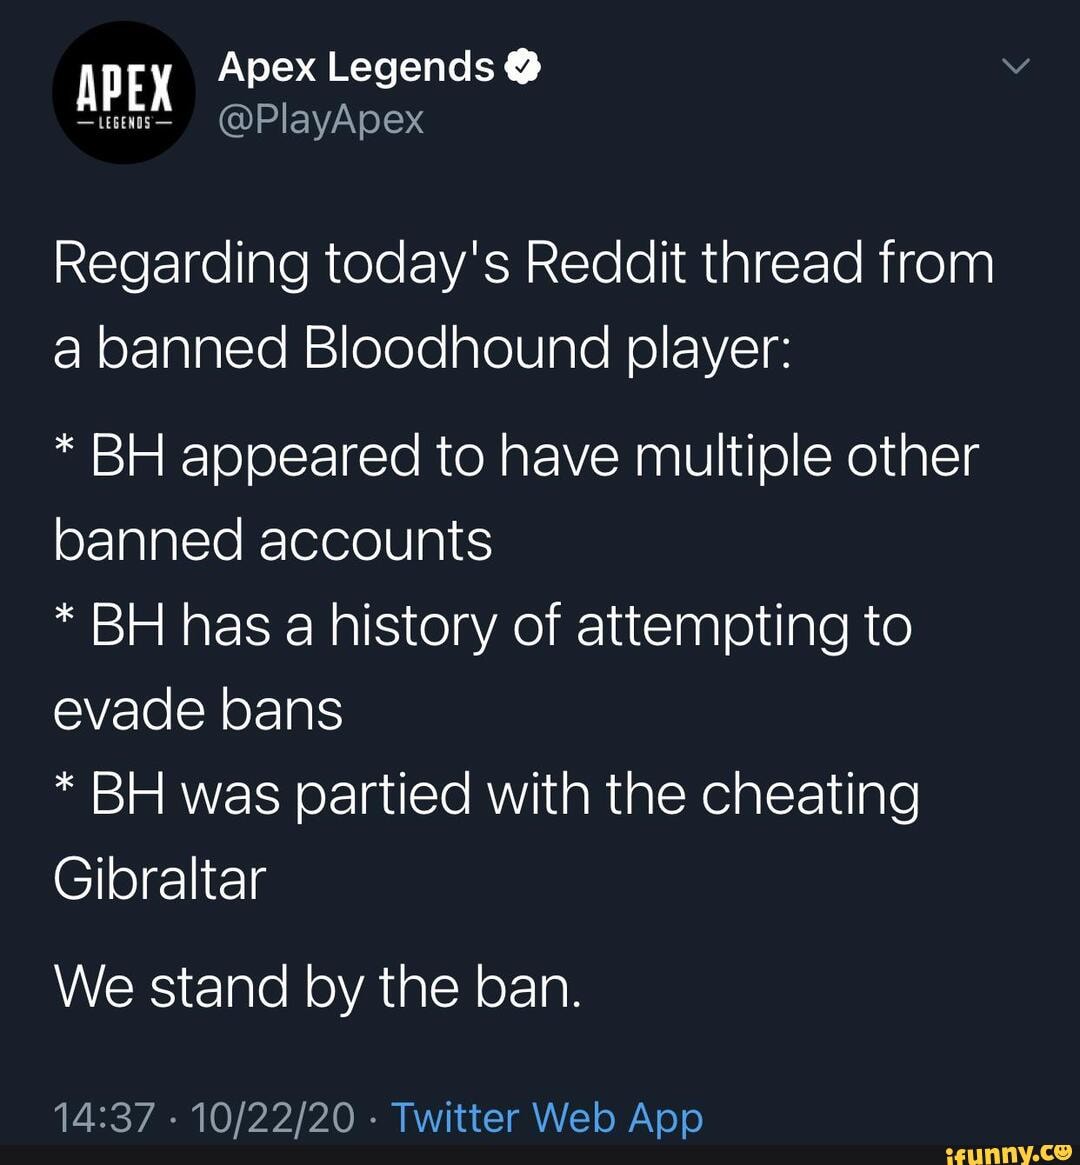 Apex Legends Apex Playapex Apex Legends Regarding Today S Reddit Thread From A Banned Bloodhound Player Bh Appeared To Have Multiple Other Banned Accounts Bh Has A History Of Attempting